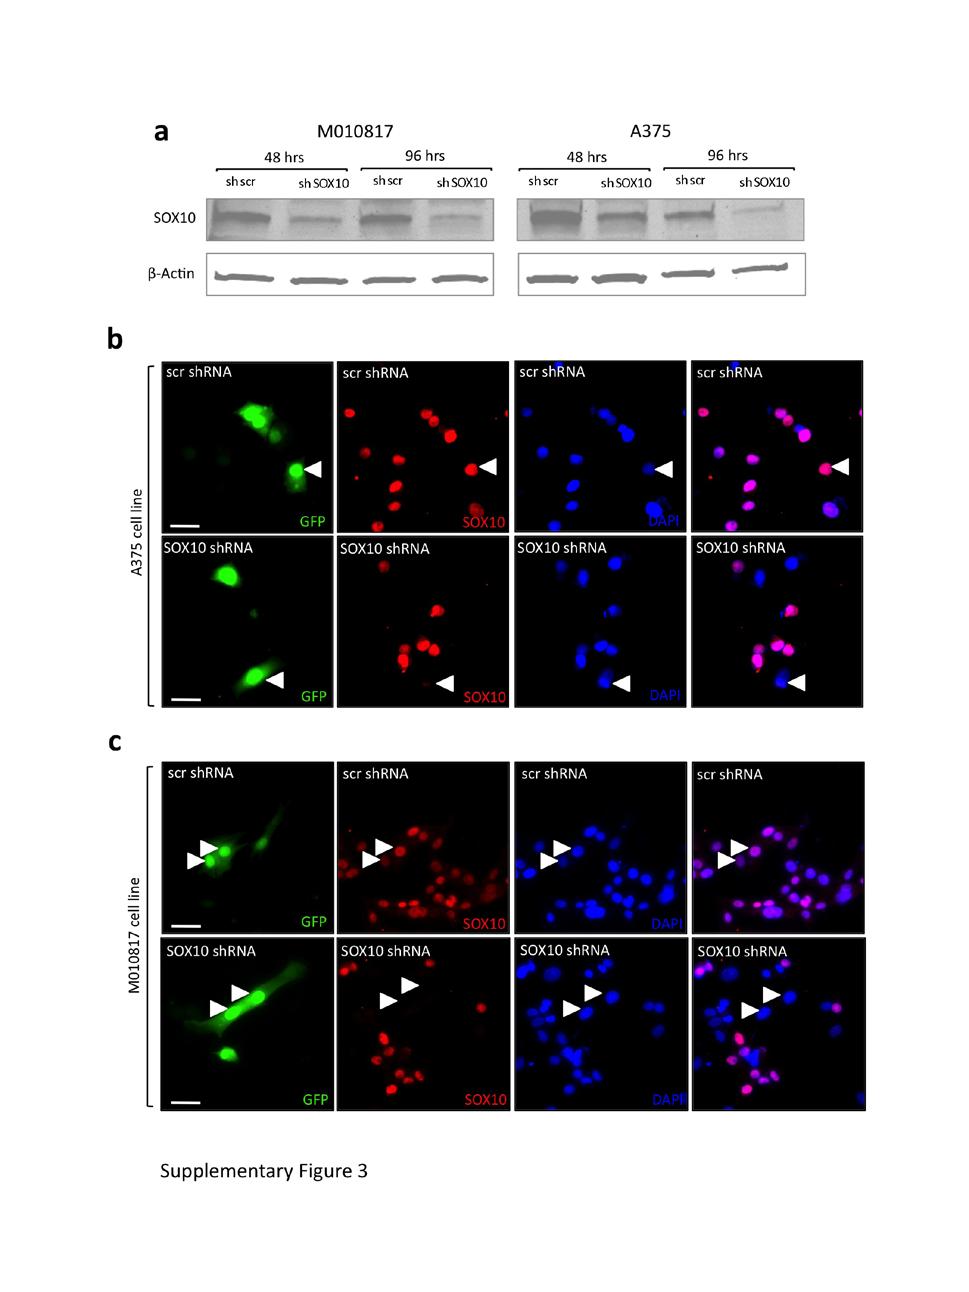 Figure S3 Characterization of SOX10 expression upon SOX10 knockdown in vitro in human melanoma cell lines.